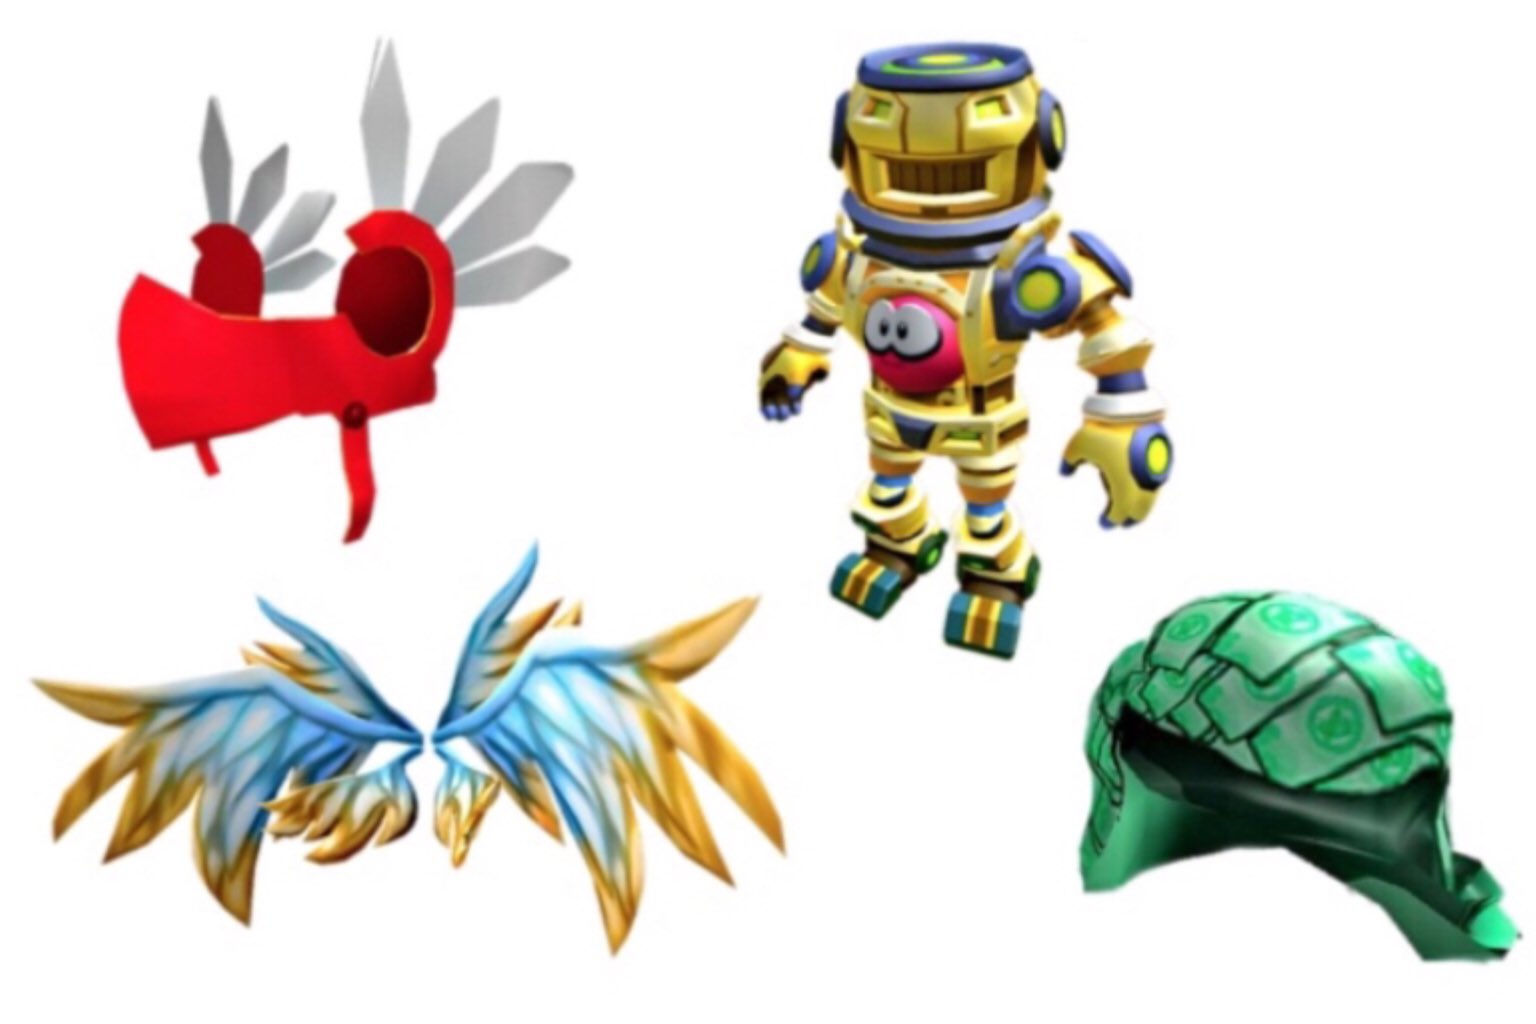 Lily On Twitter Are The Current Bonus Codes From Series 5 Also Included In The New Upcoming Series Jazwares Can We Still Find A Red Valk Bonus Code In A Series 6 - red valk on roblox